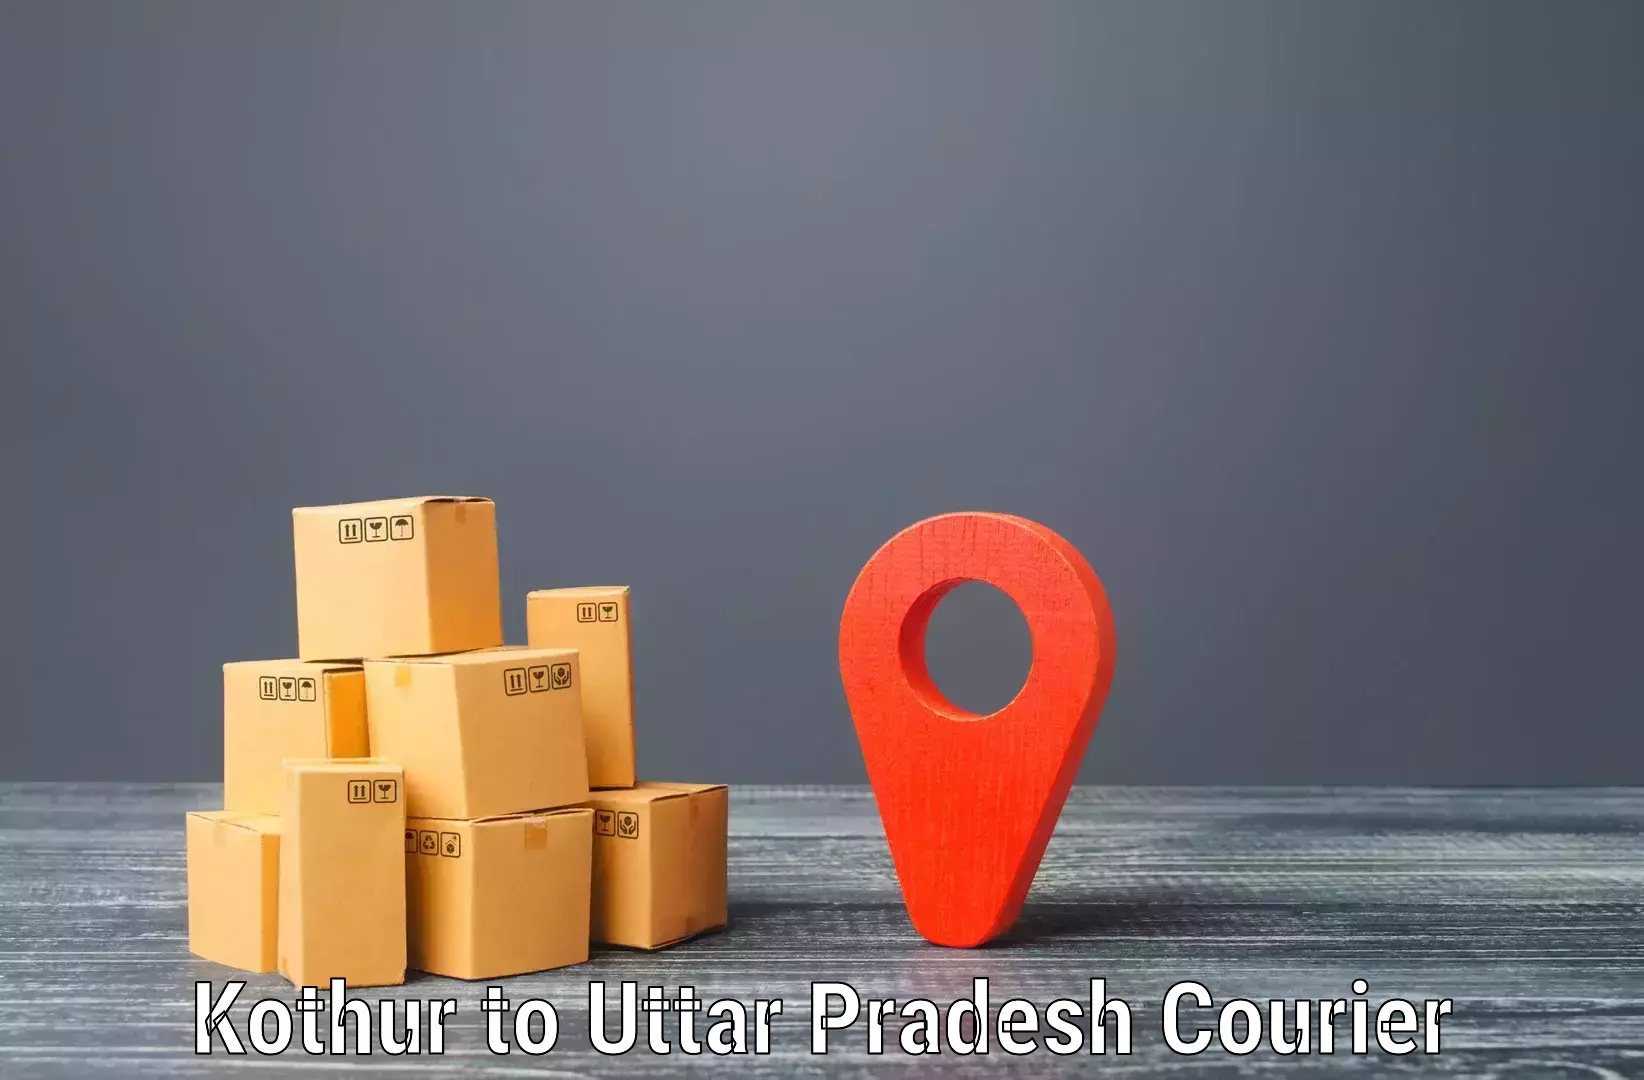 Large-scale shipping solutions in Kothur to Salempur